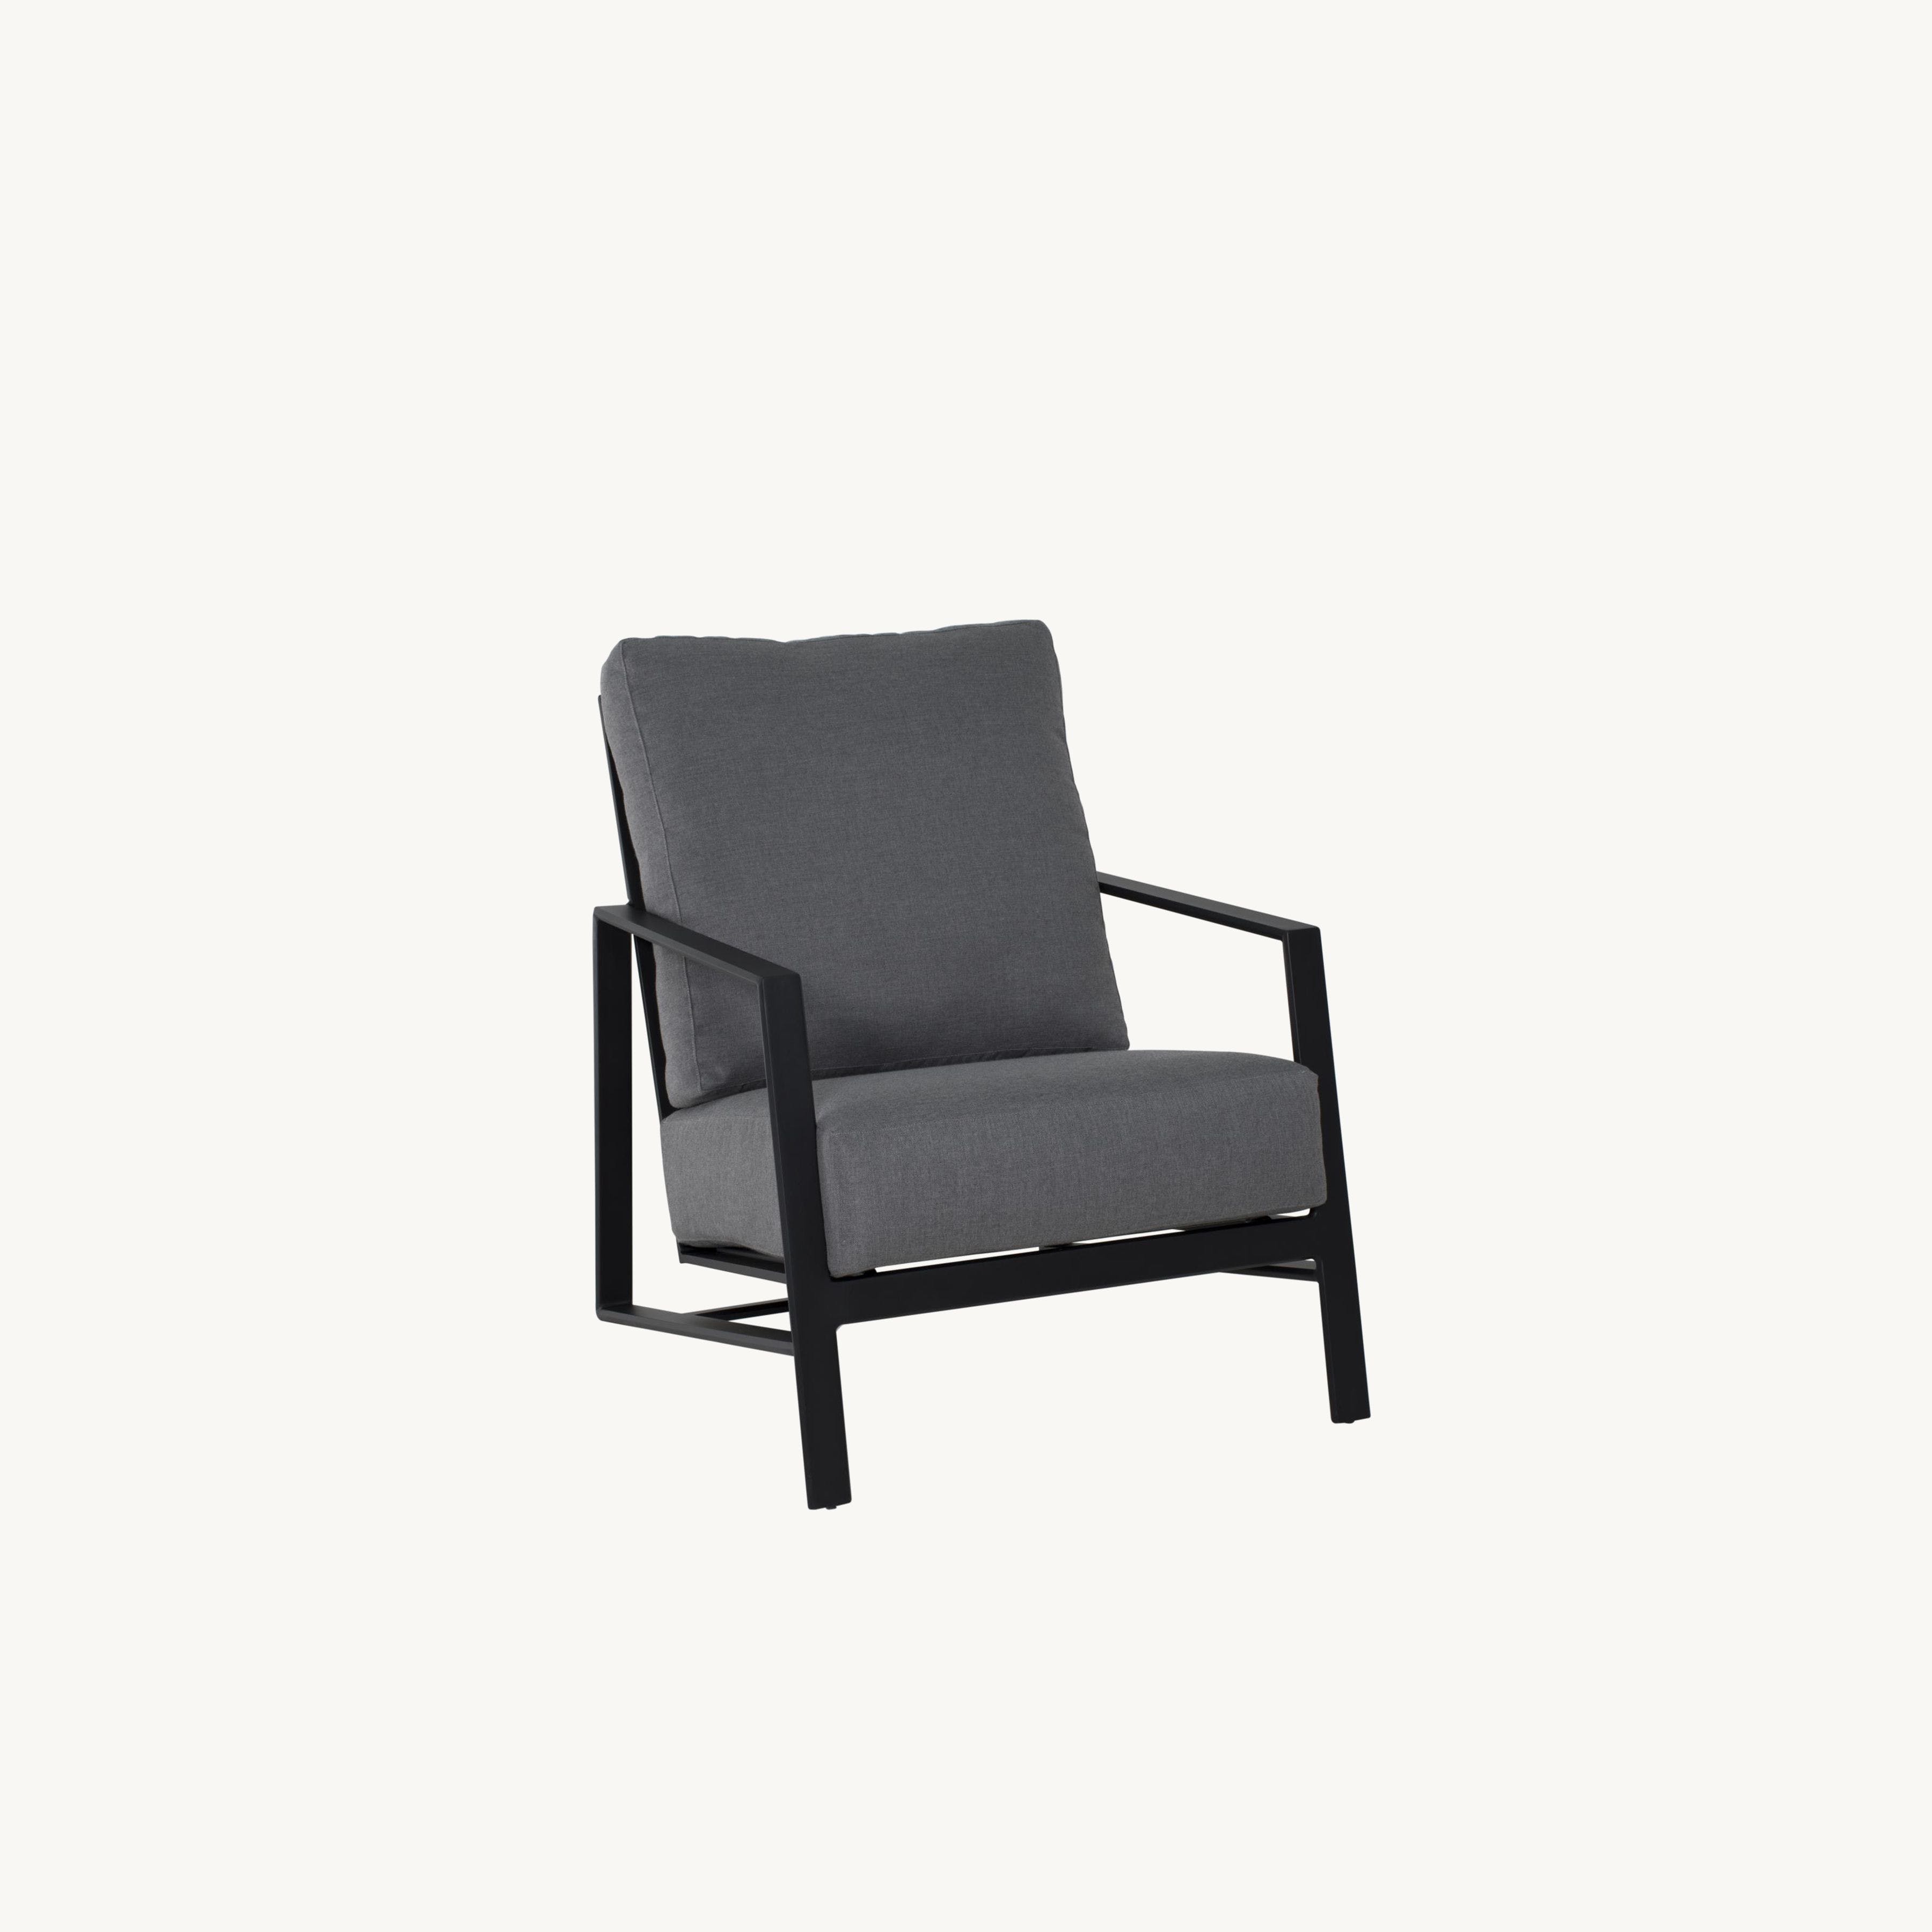 Prism Cushioned Lounge Chair By Castelle